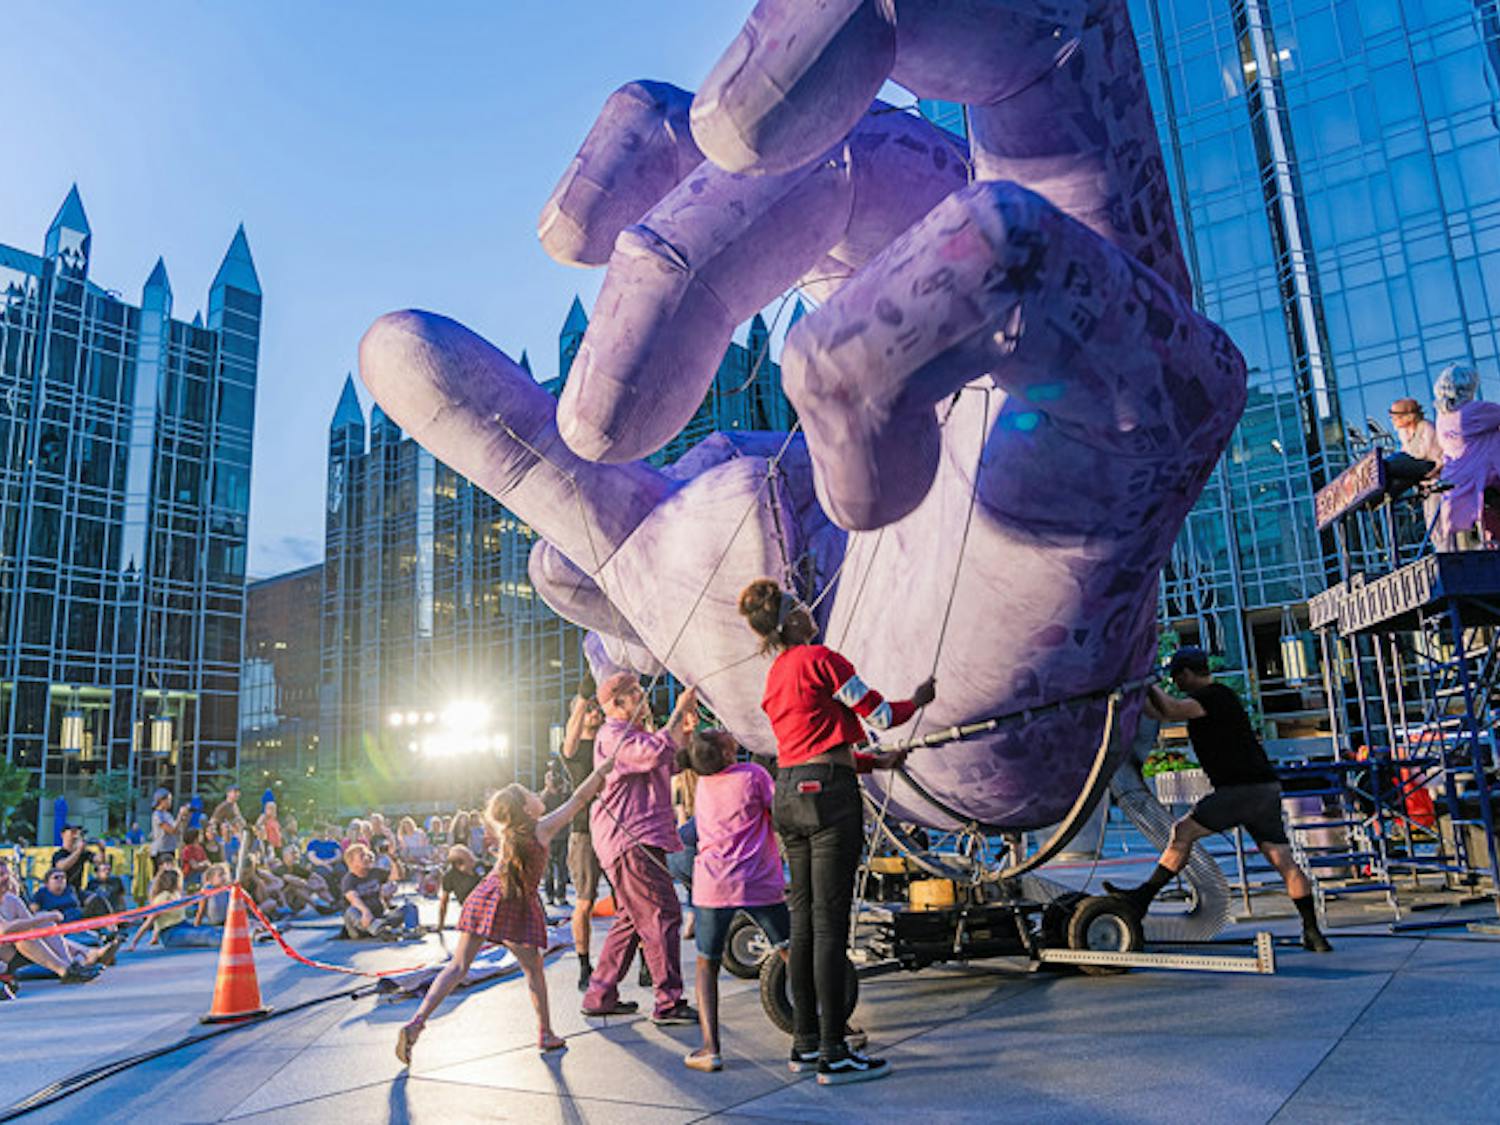 Musicians from the band Squonk and audience members work together to manipulate the purple hands during the band's 'Hand to Hand' performance on their 2019 tour.